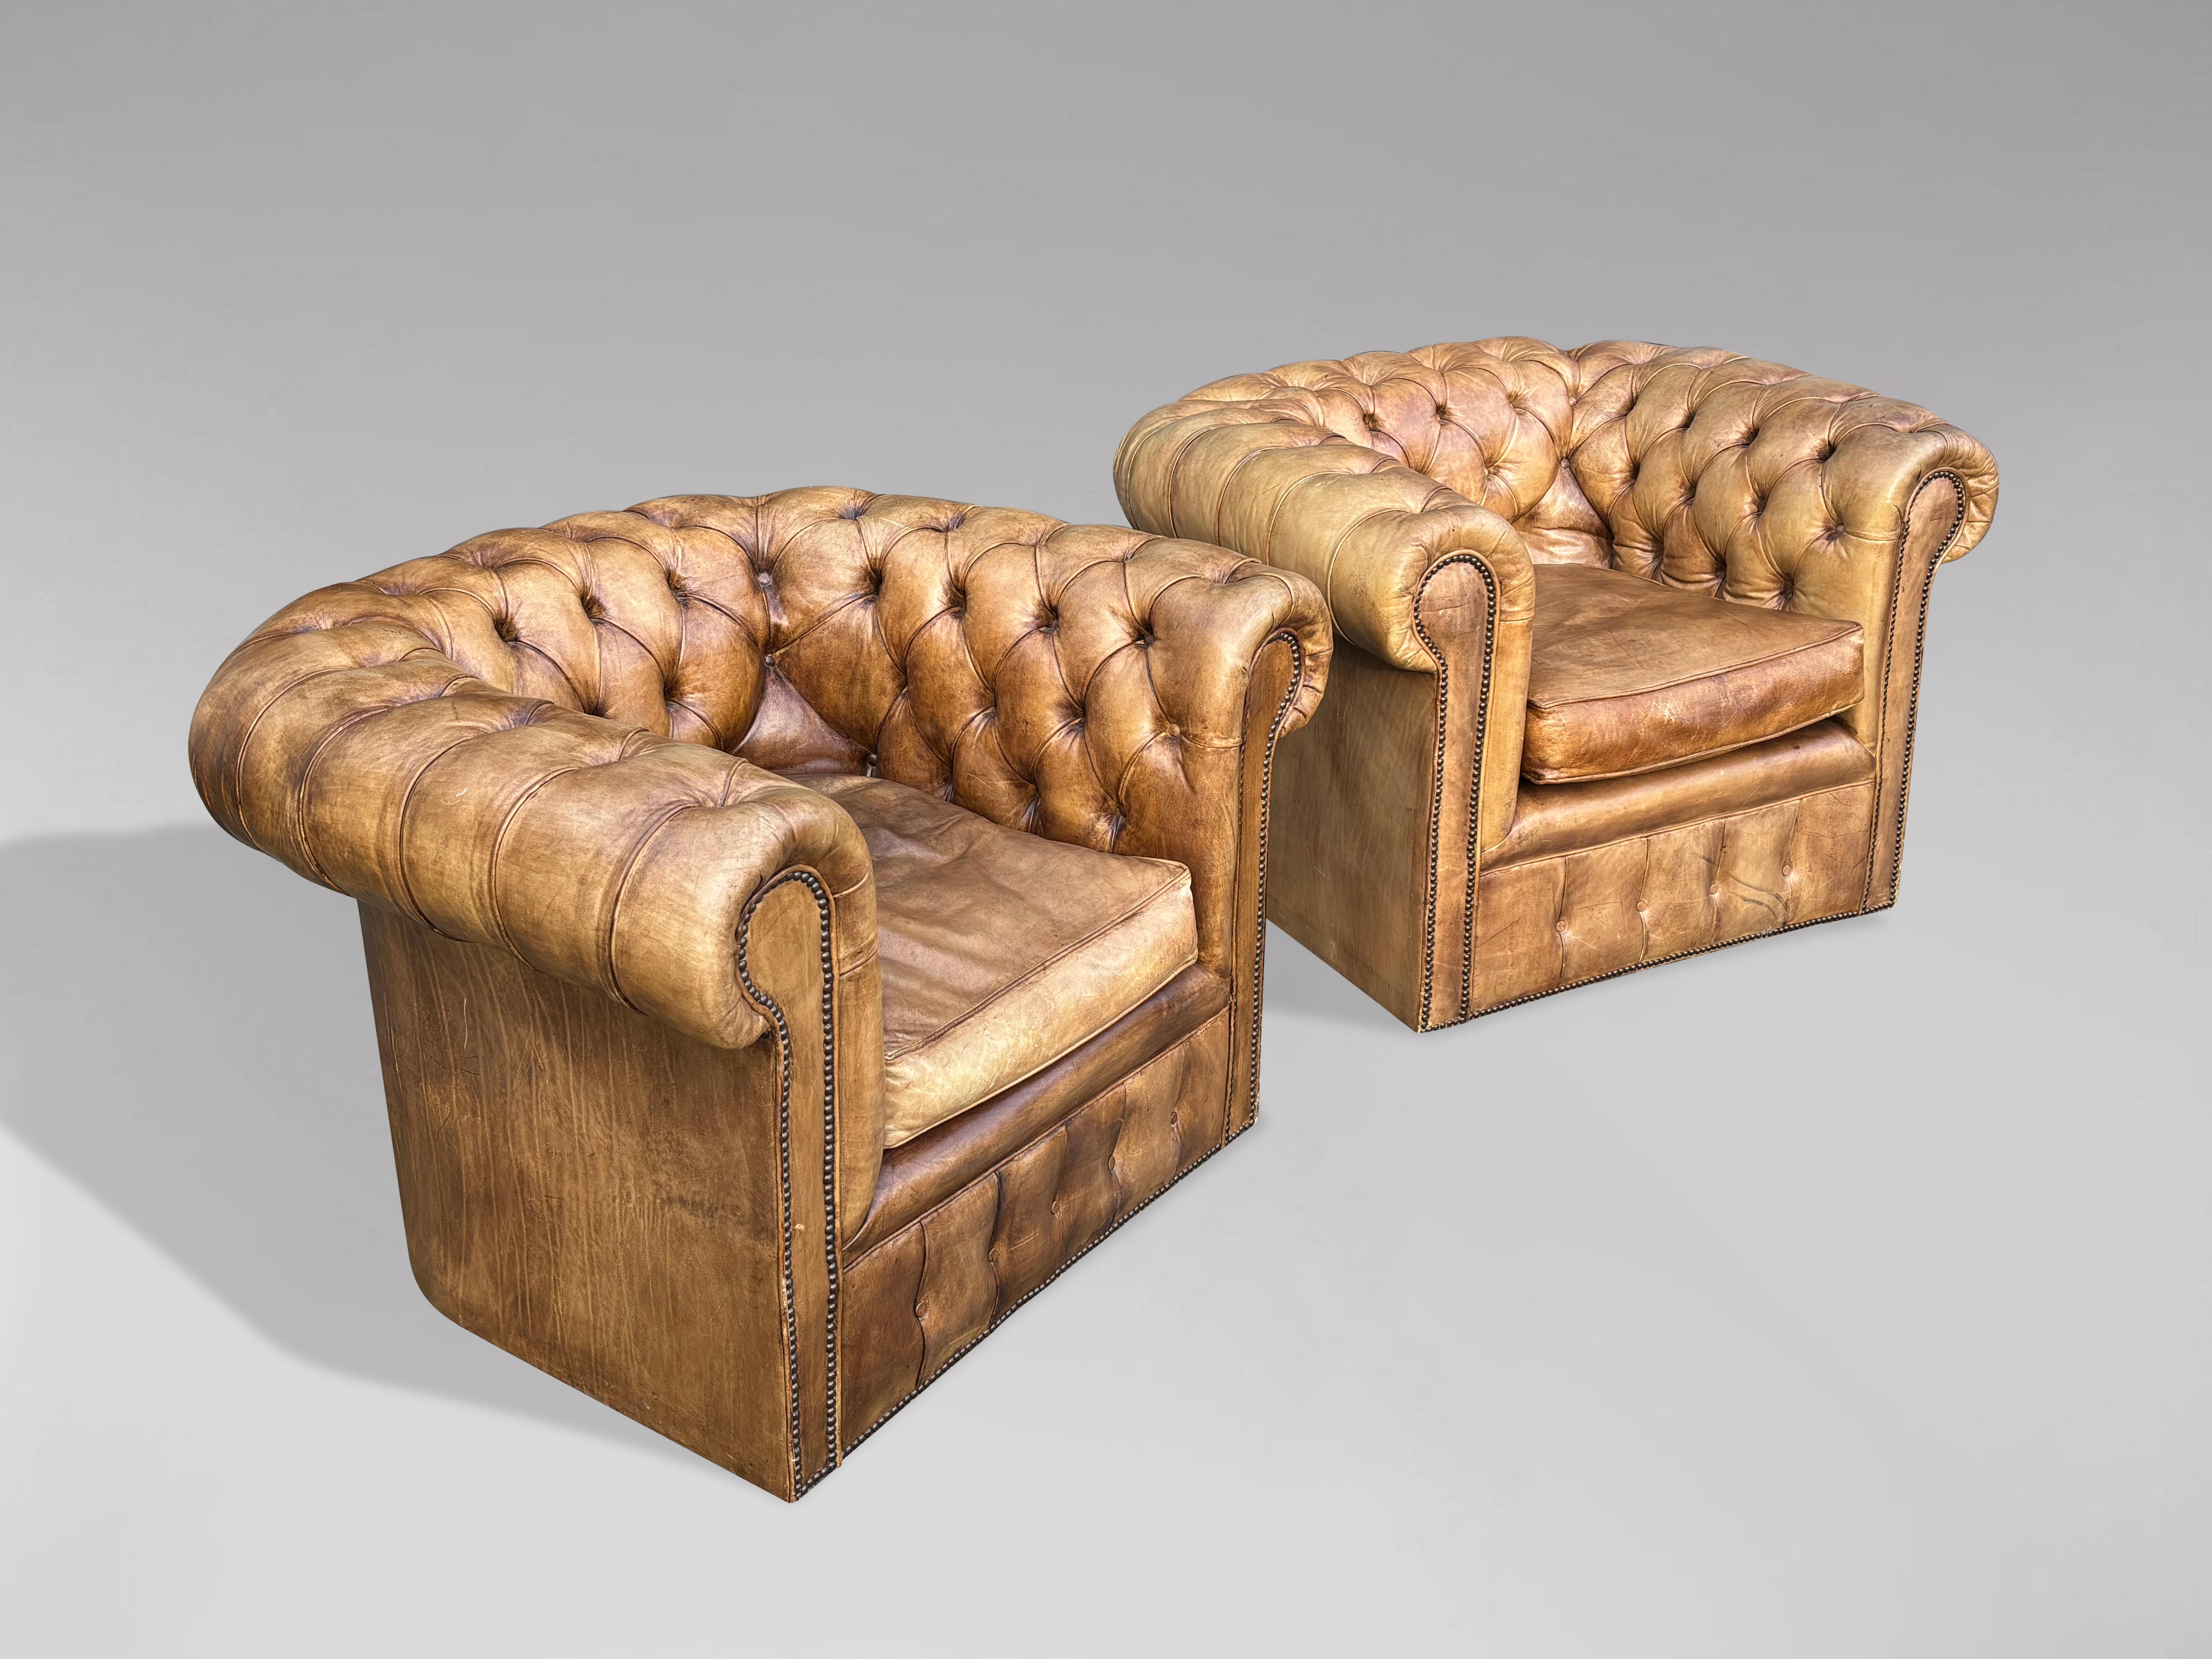 A pair of good quality late 19th century, Victorian period beige leather chesterfield club armchairs. Original hand dyed beige leather hide that has been cleaned and polished giving a lovely soft and sumptuous feel to the quality leather. The